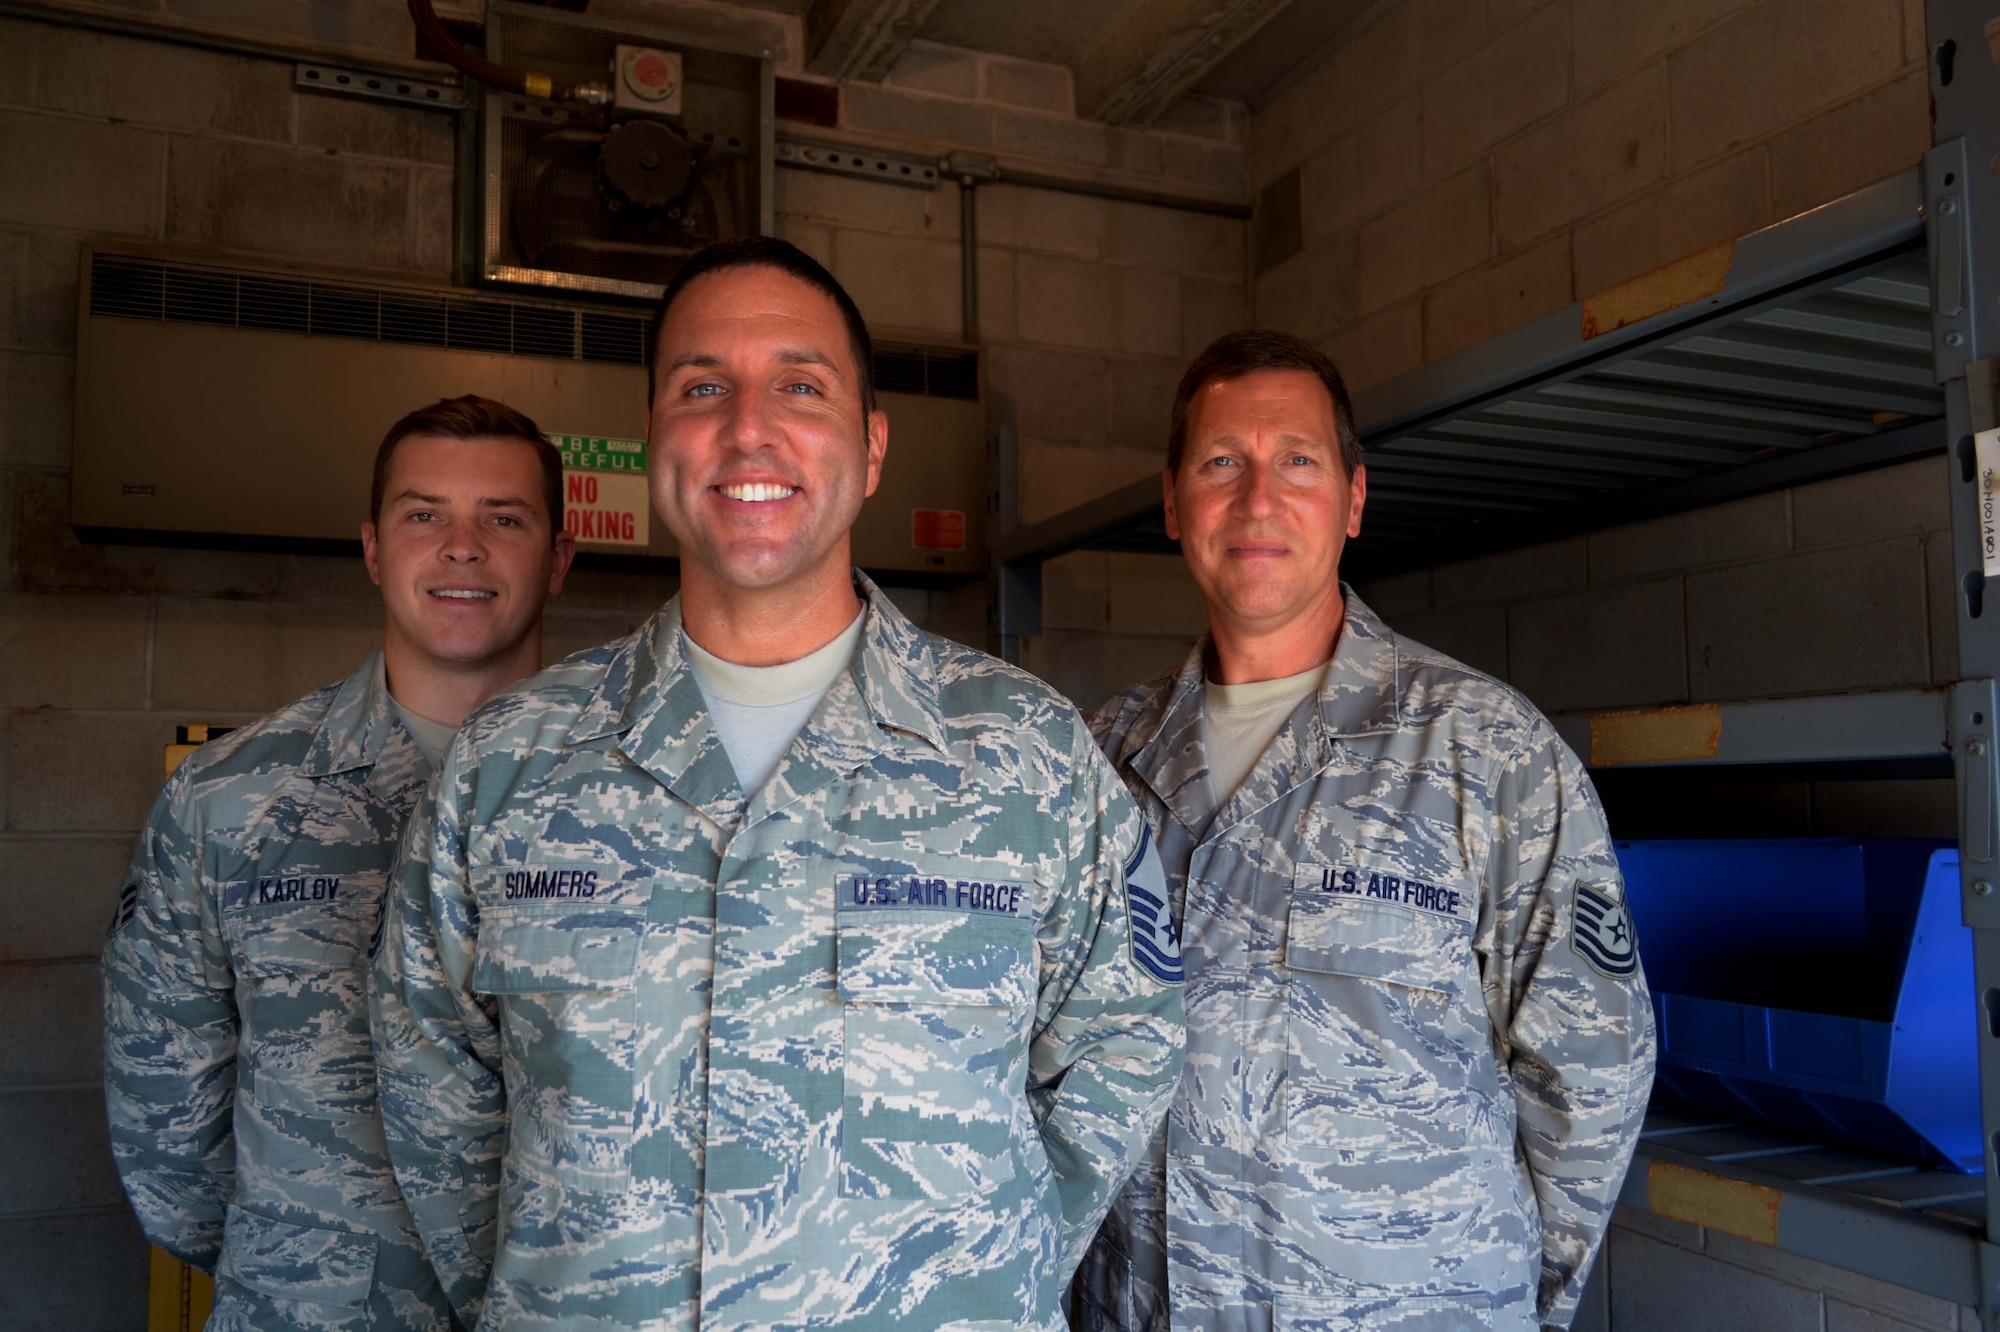 Senior Airman Igor Karlov, Master Sgt. Joe Sommers and Tech. Sgt. Robert Custer III, all from the 111th Logistics Readiness Squadron, stand in the totally empty Hazardous Material Pharmacy here at Horsham Air Guard Station, Pa., July 8, 2016. The Hazardous Material Pharmacy, referred to as the Hazmart or HazMat Pharmacy, is intended to provide an environmentally friendly way to handle, store, dispense, track, recycle and dispose of HazMat on an Air Force installation. (U.S. Air National Guard photo by Tech. Sgt. Andria Allmond)